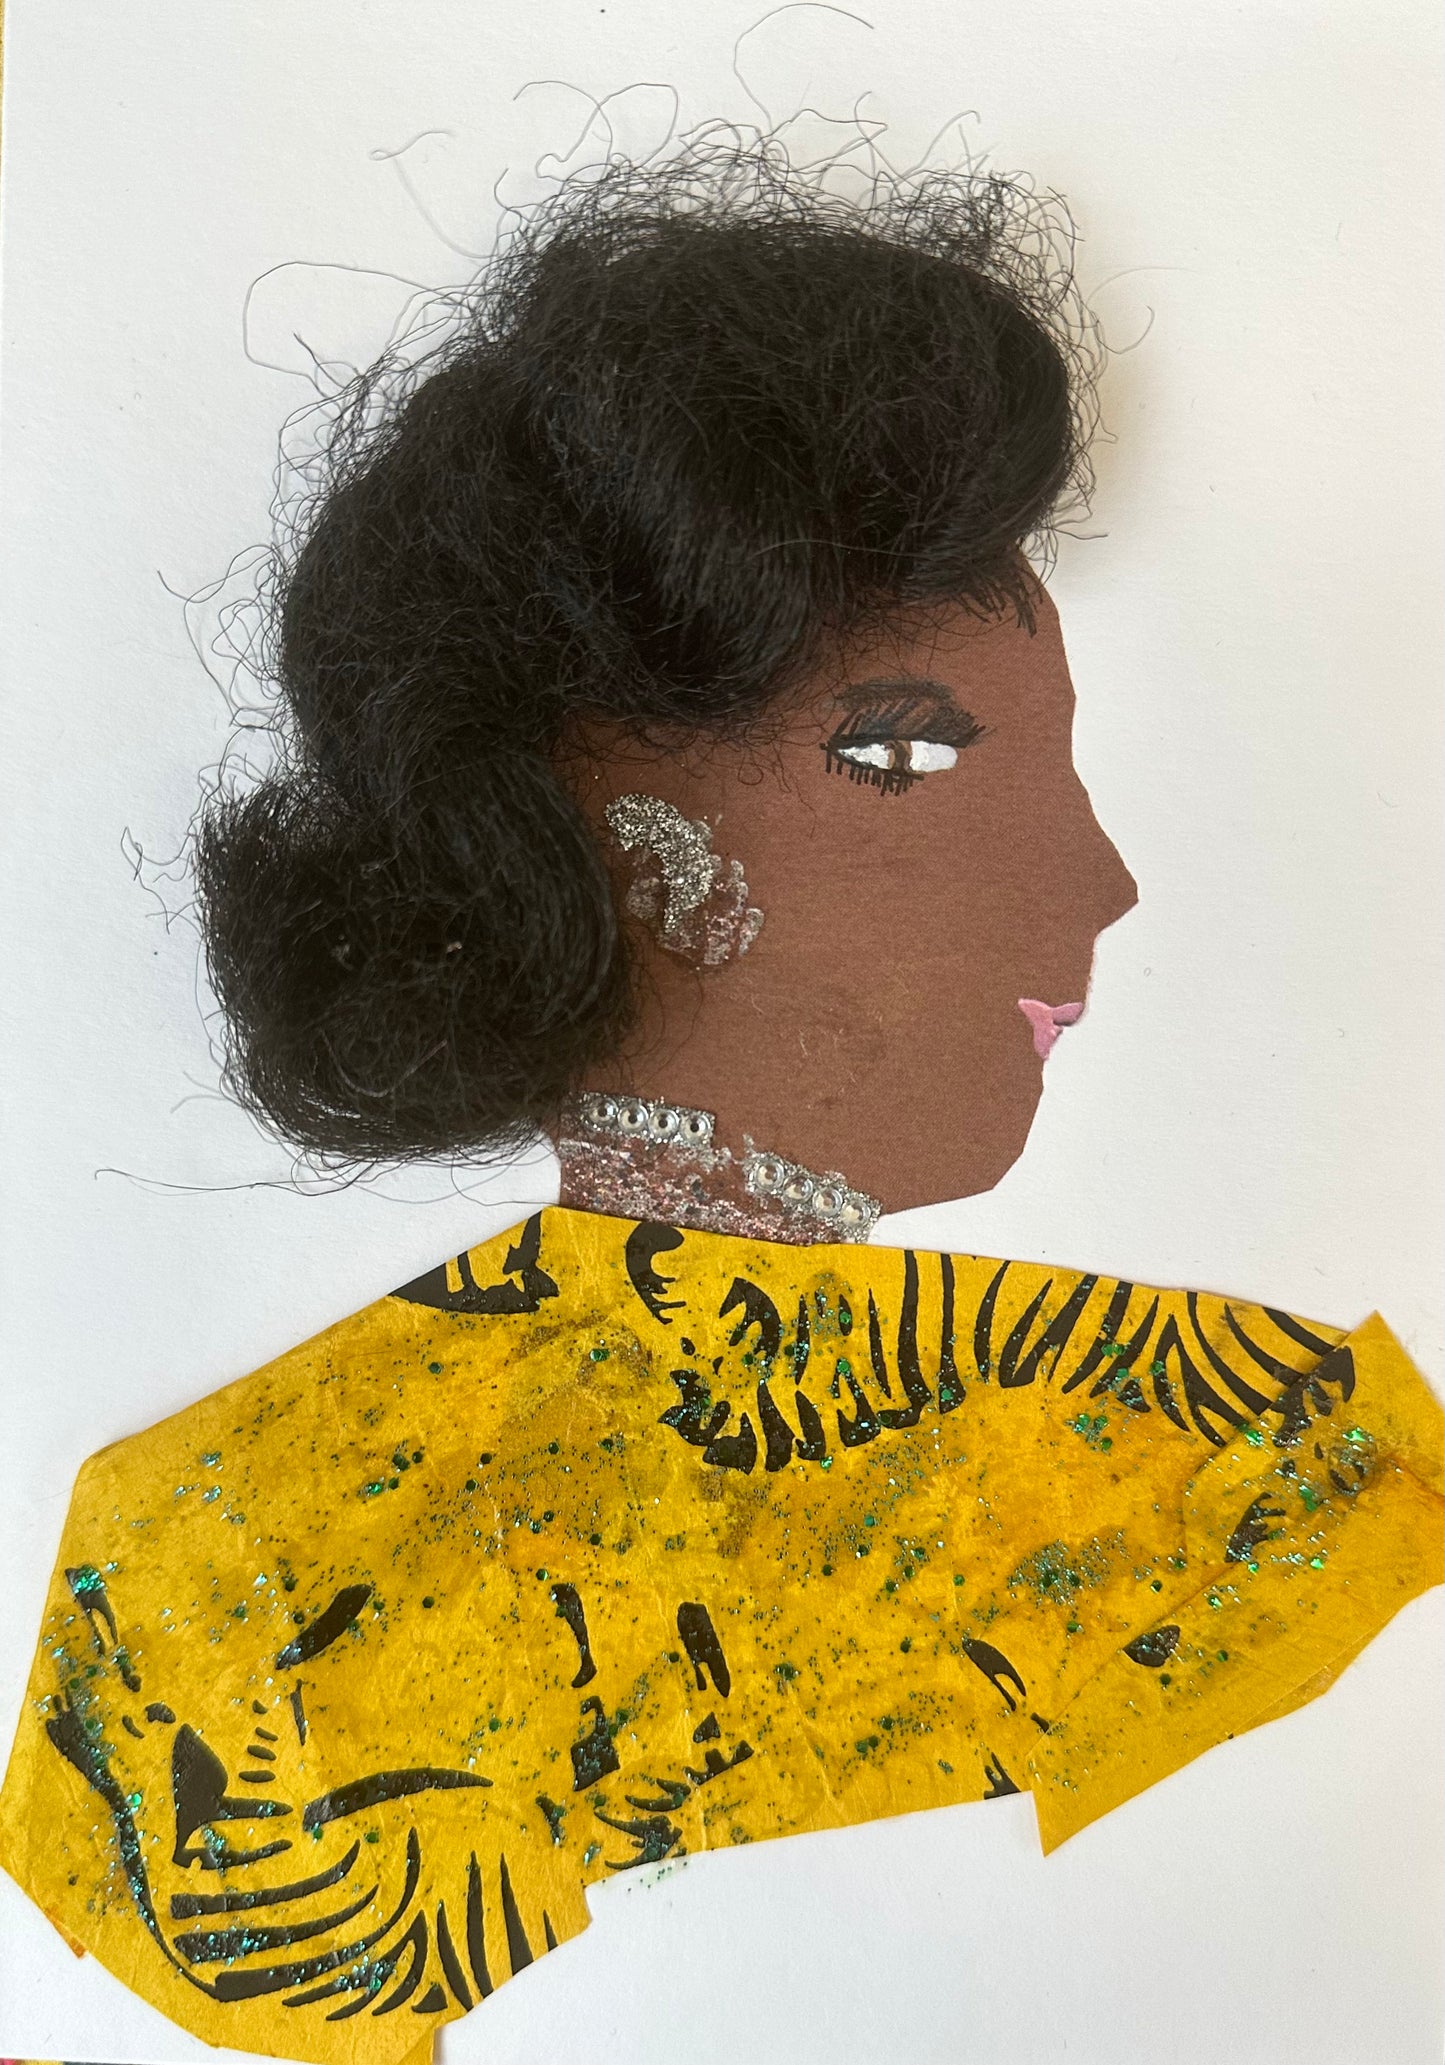 This handmade card is of a woman named Brent Betsy who is wearing a yellow blouse that is patterned with the outline of a zebra. Her earrings and necklace are made up of silver gemstones.